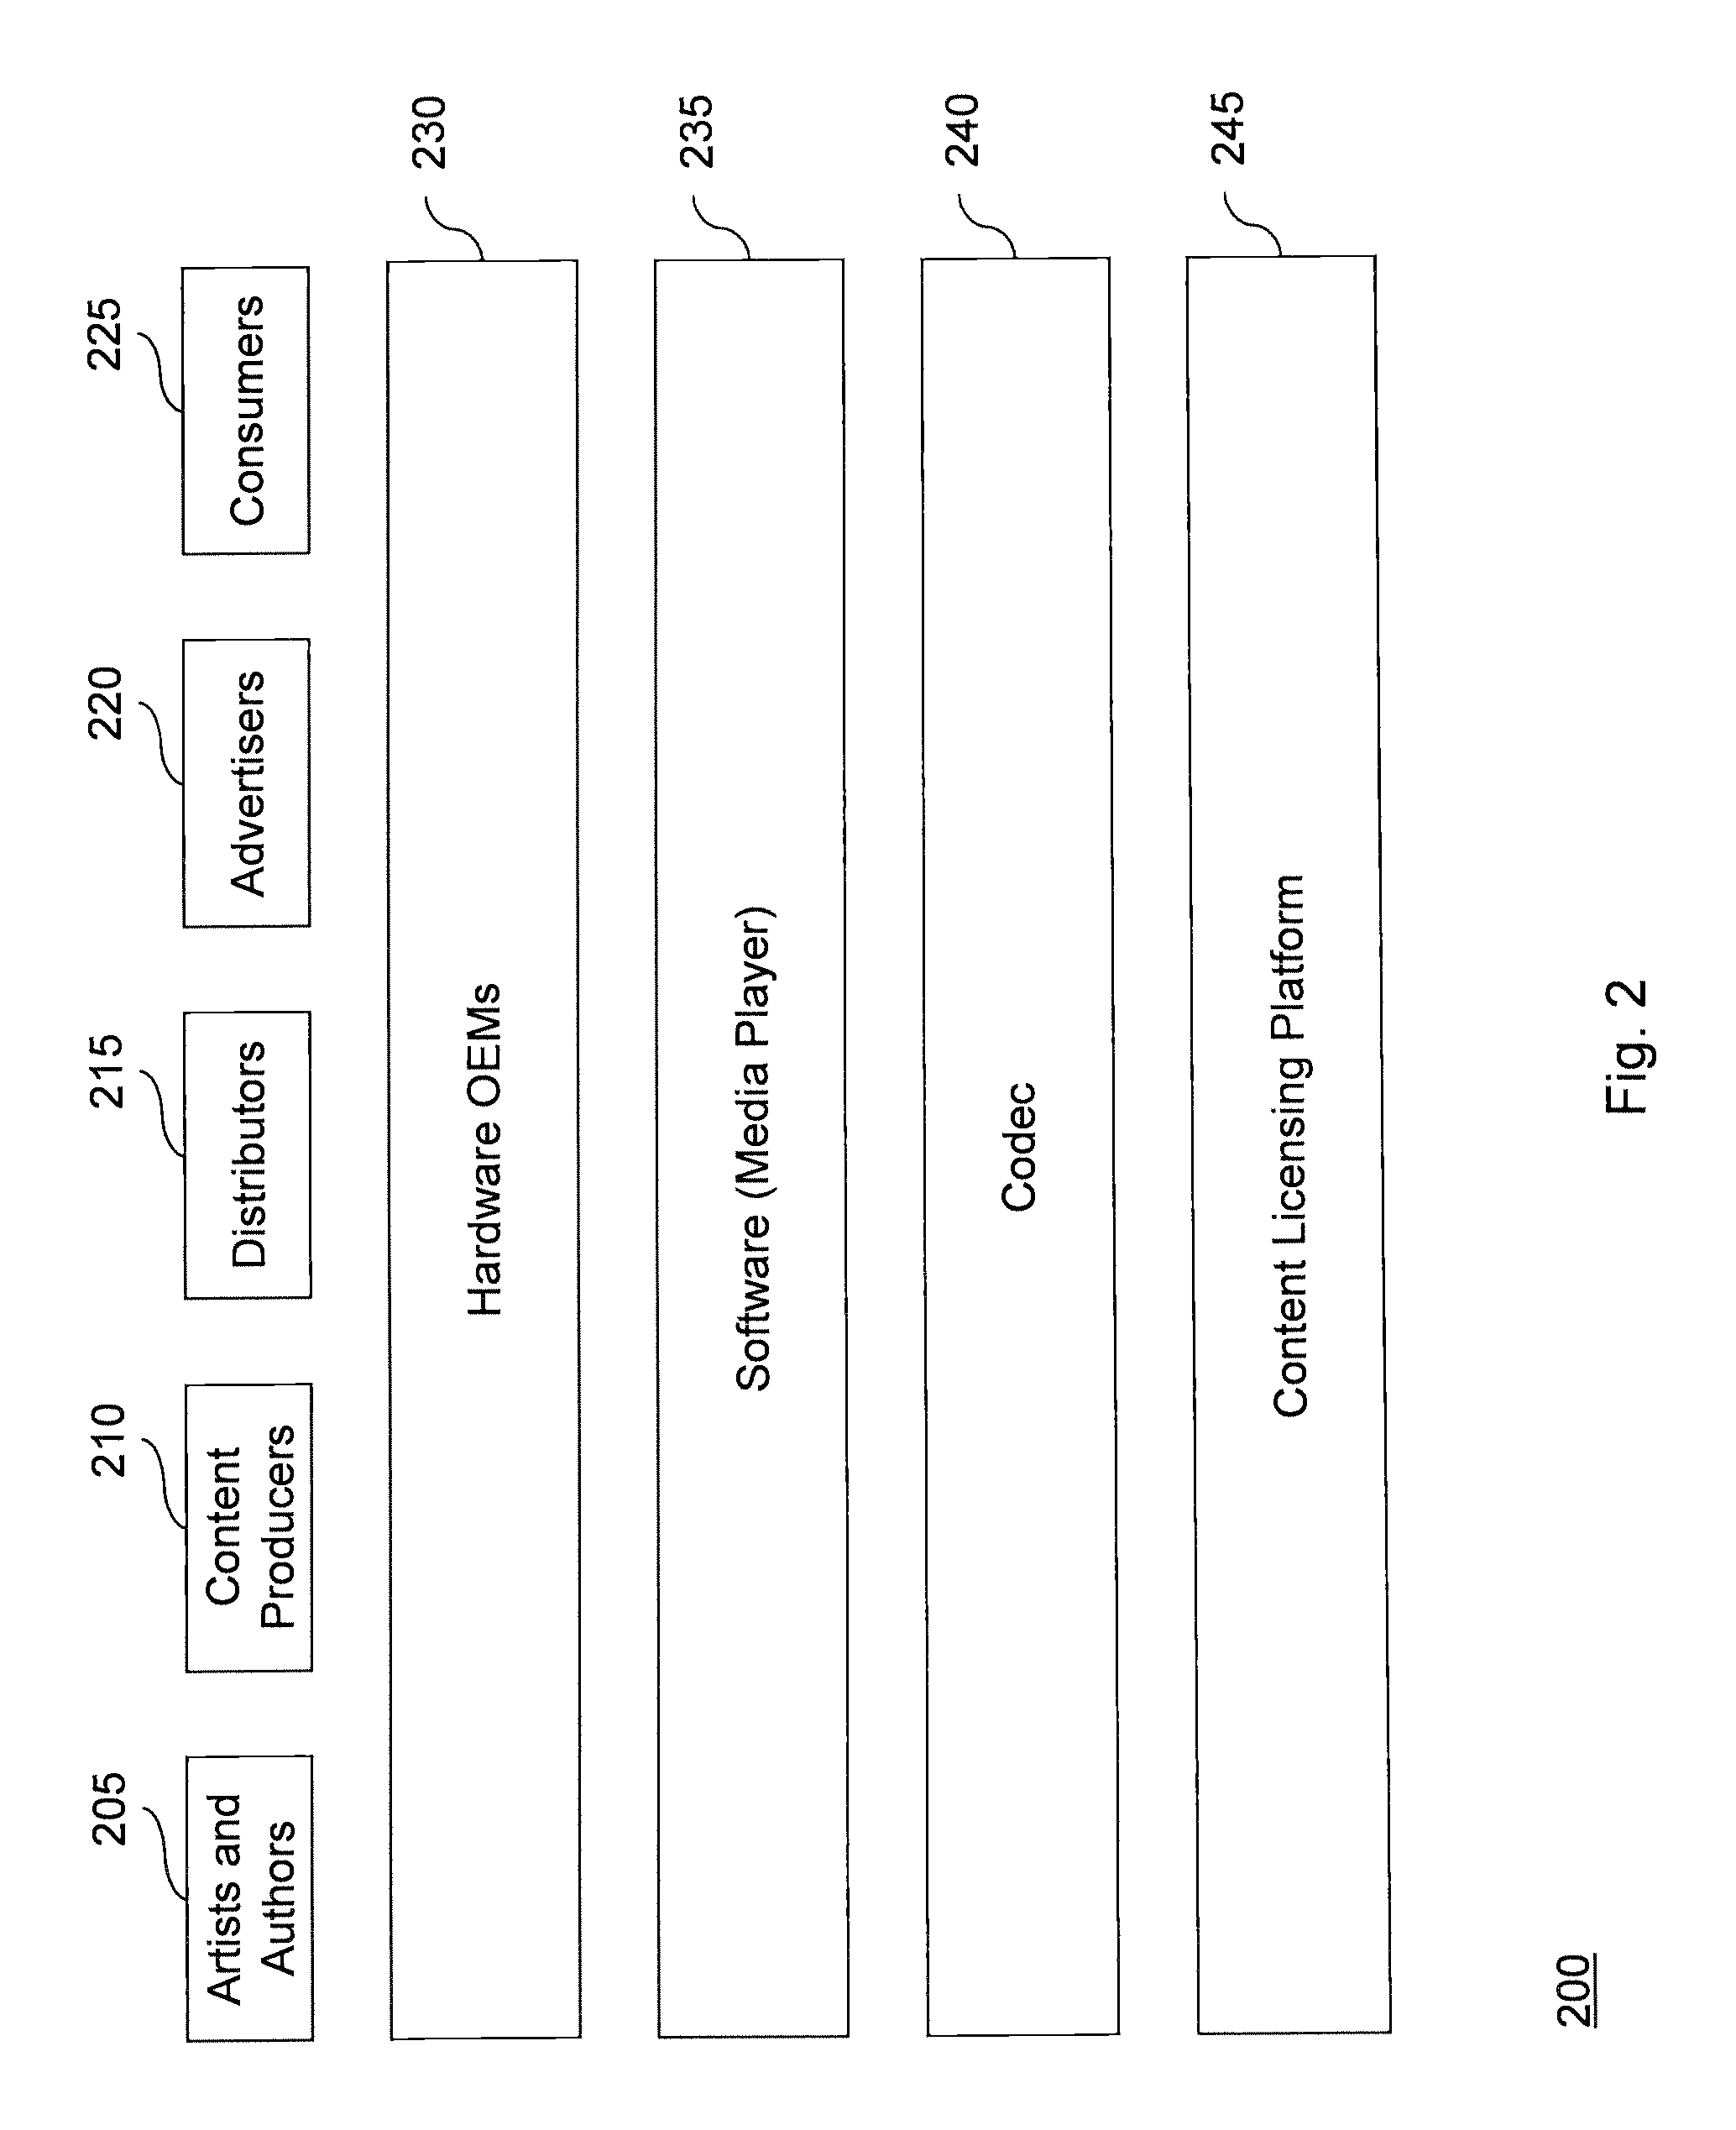 System and method for managing content consumption using a content licensing platform